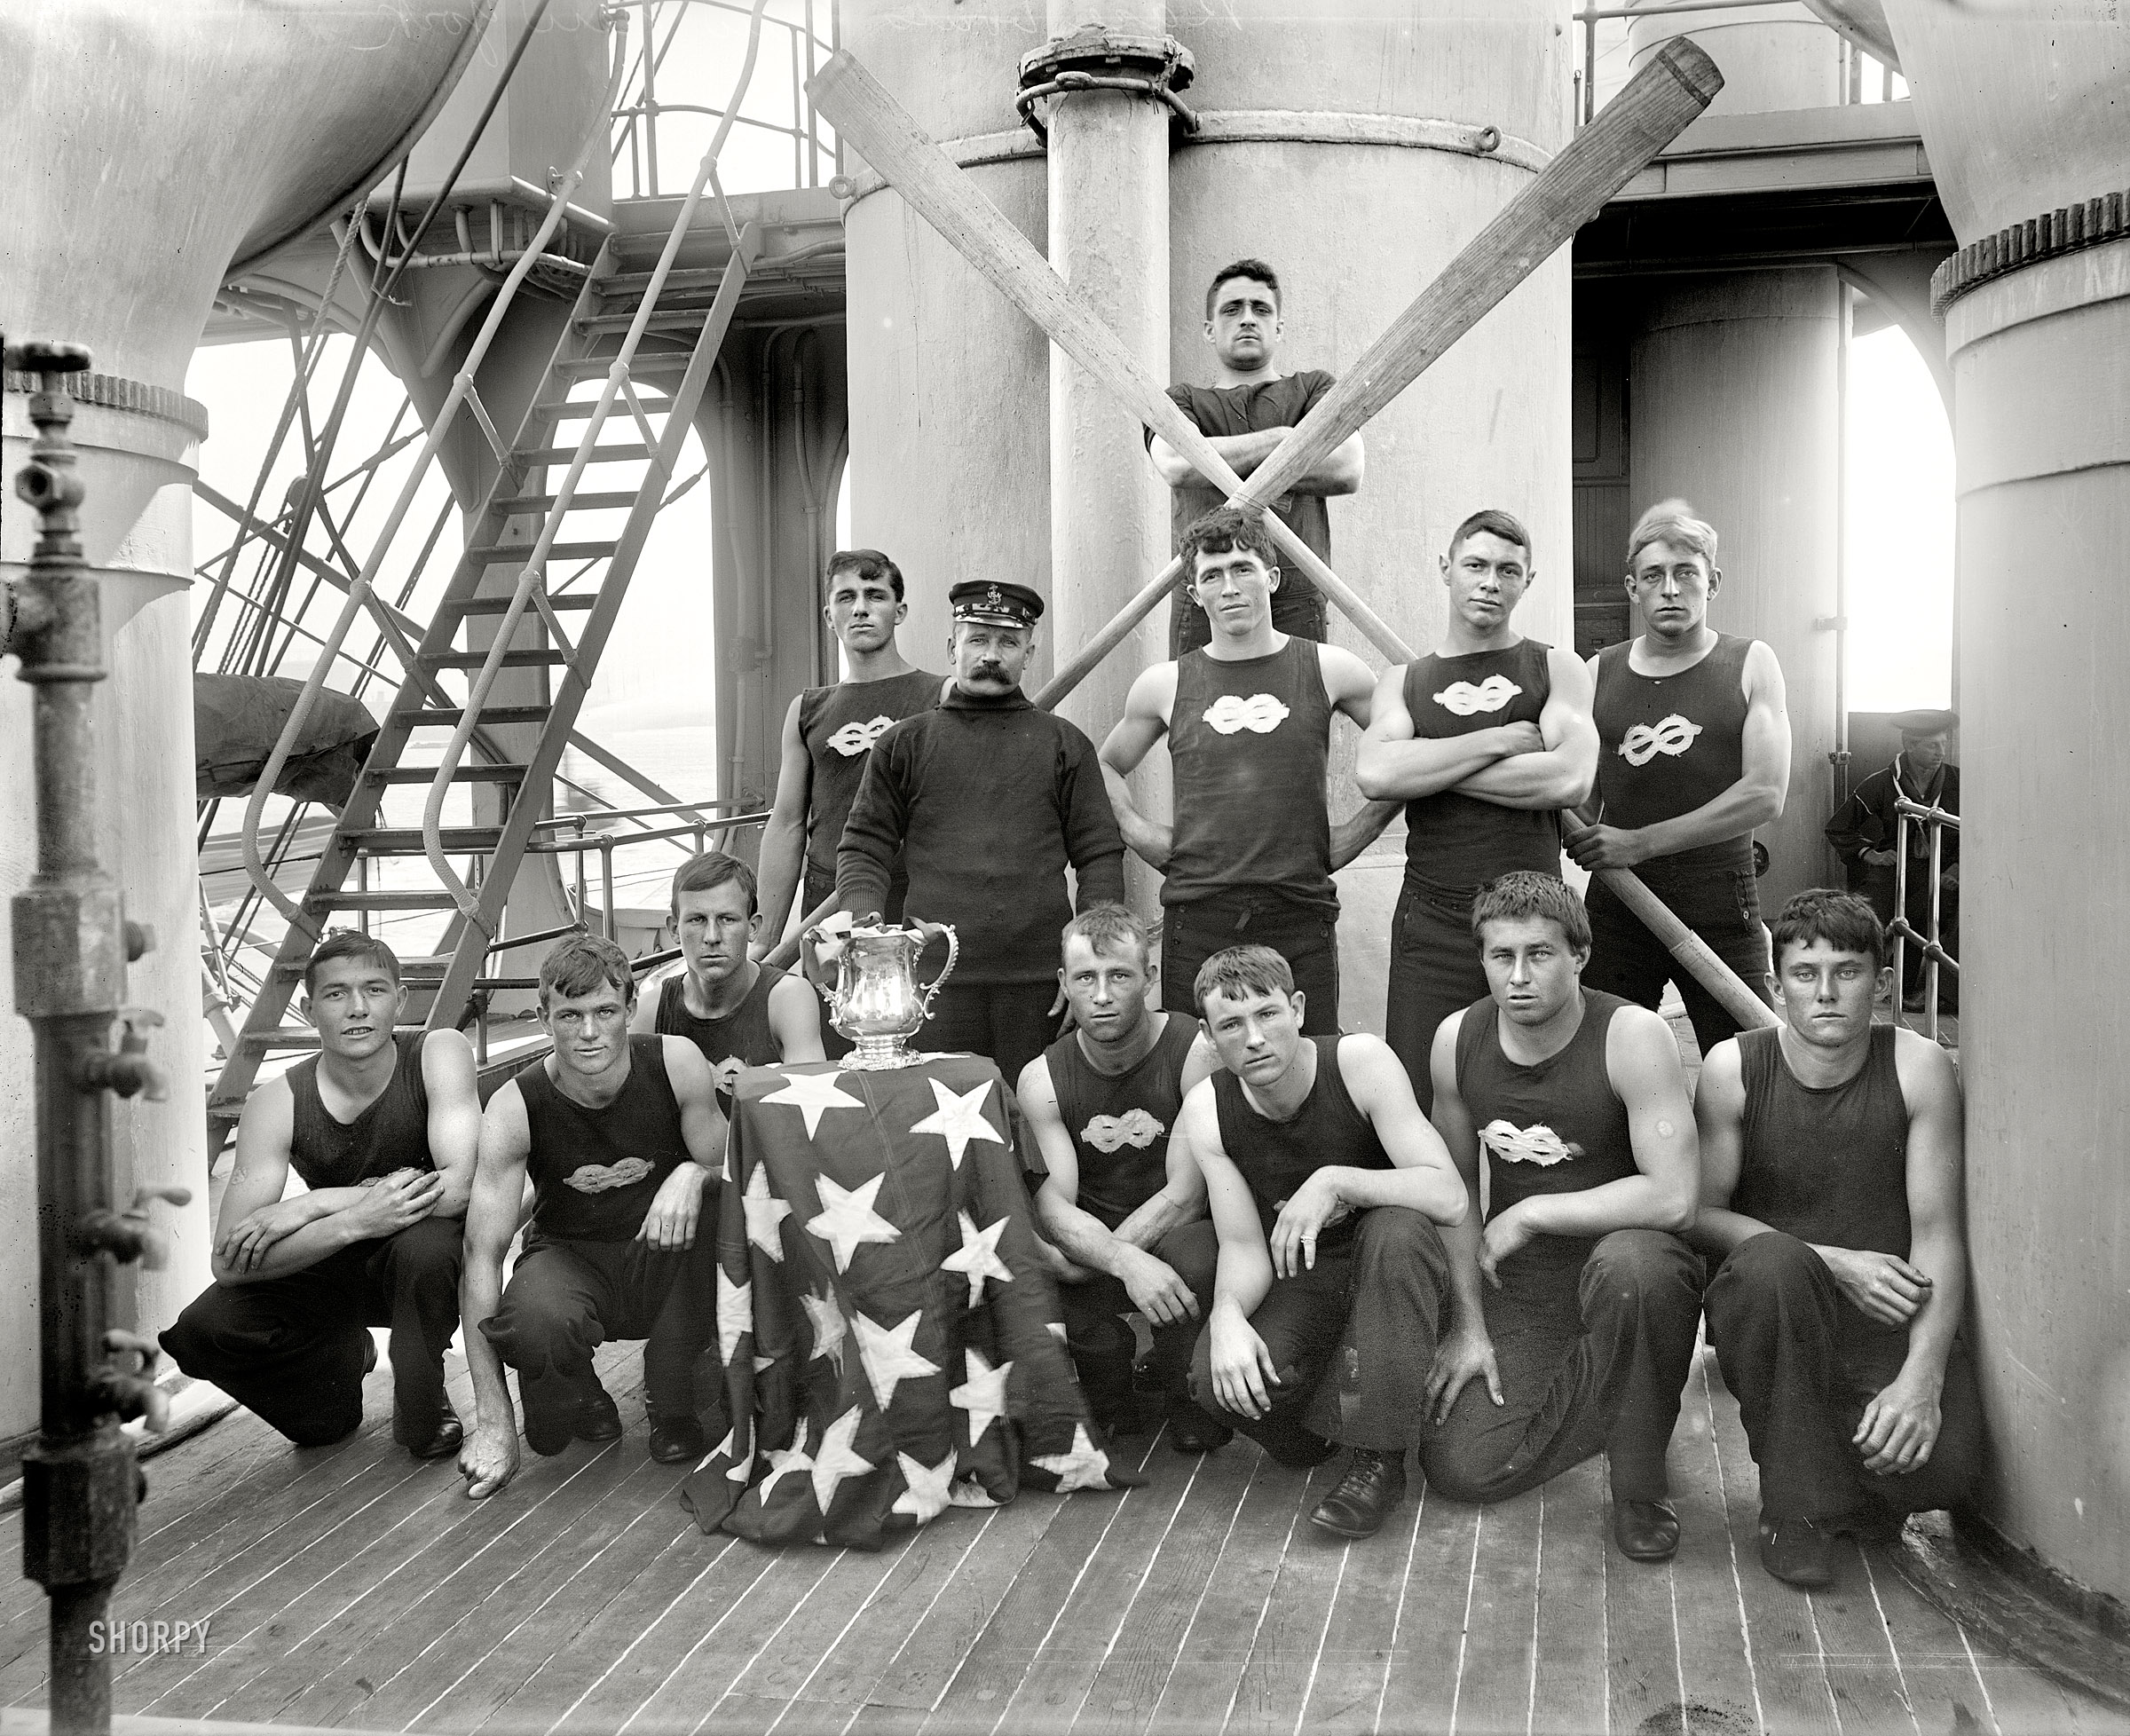 Aboard the U.S.S. New York circa 1896. "A champion boat crew." 8x10 inch dry plate glass negative by Edward Hart, Detroit Publishing Co. View full size.